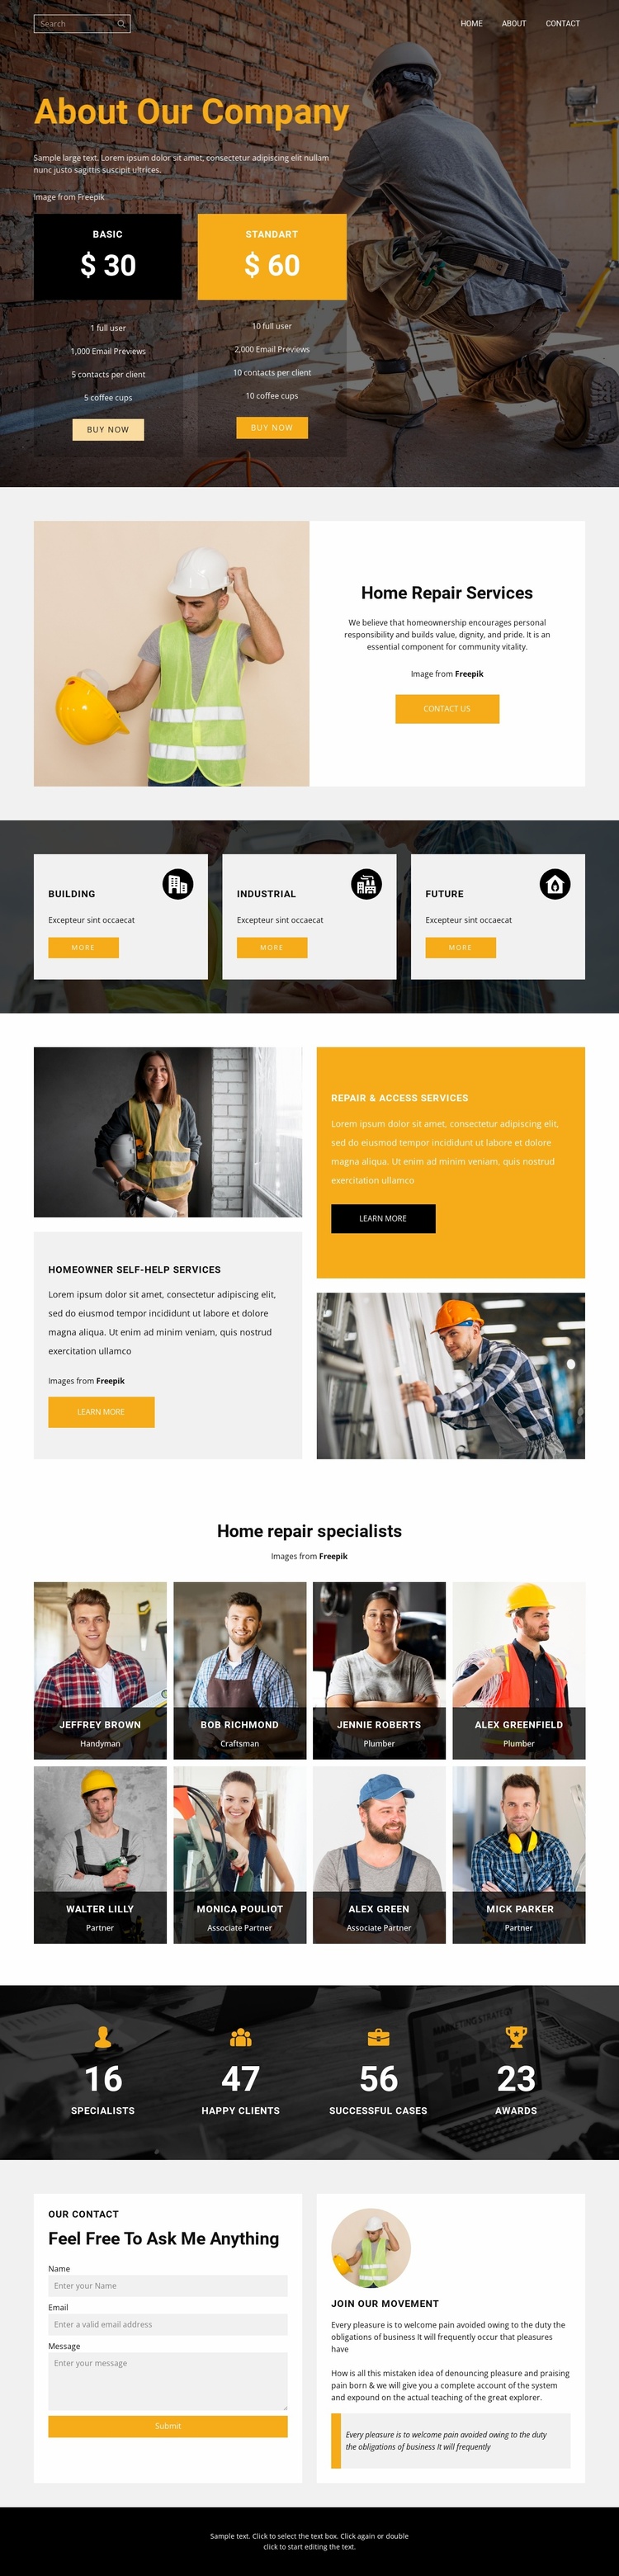 We will build a better home Landing Page